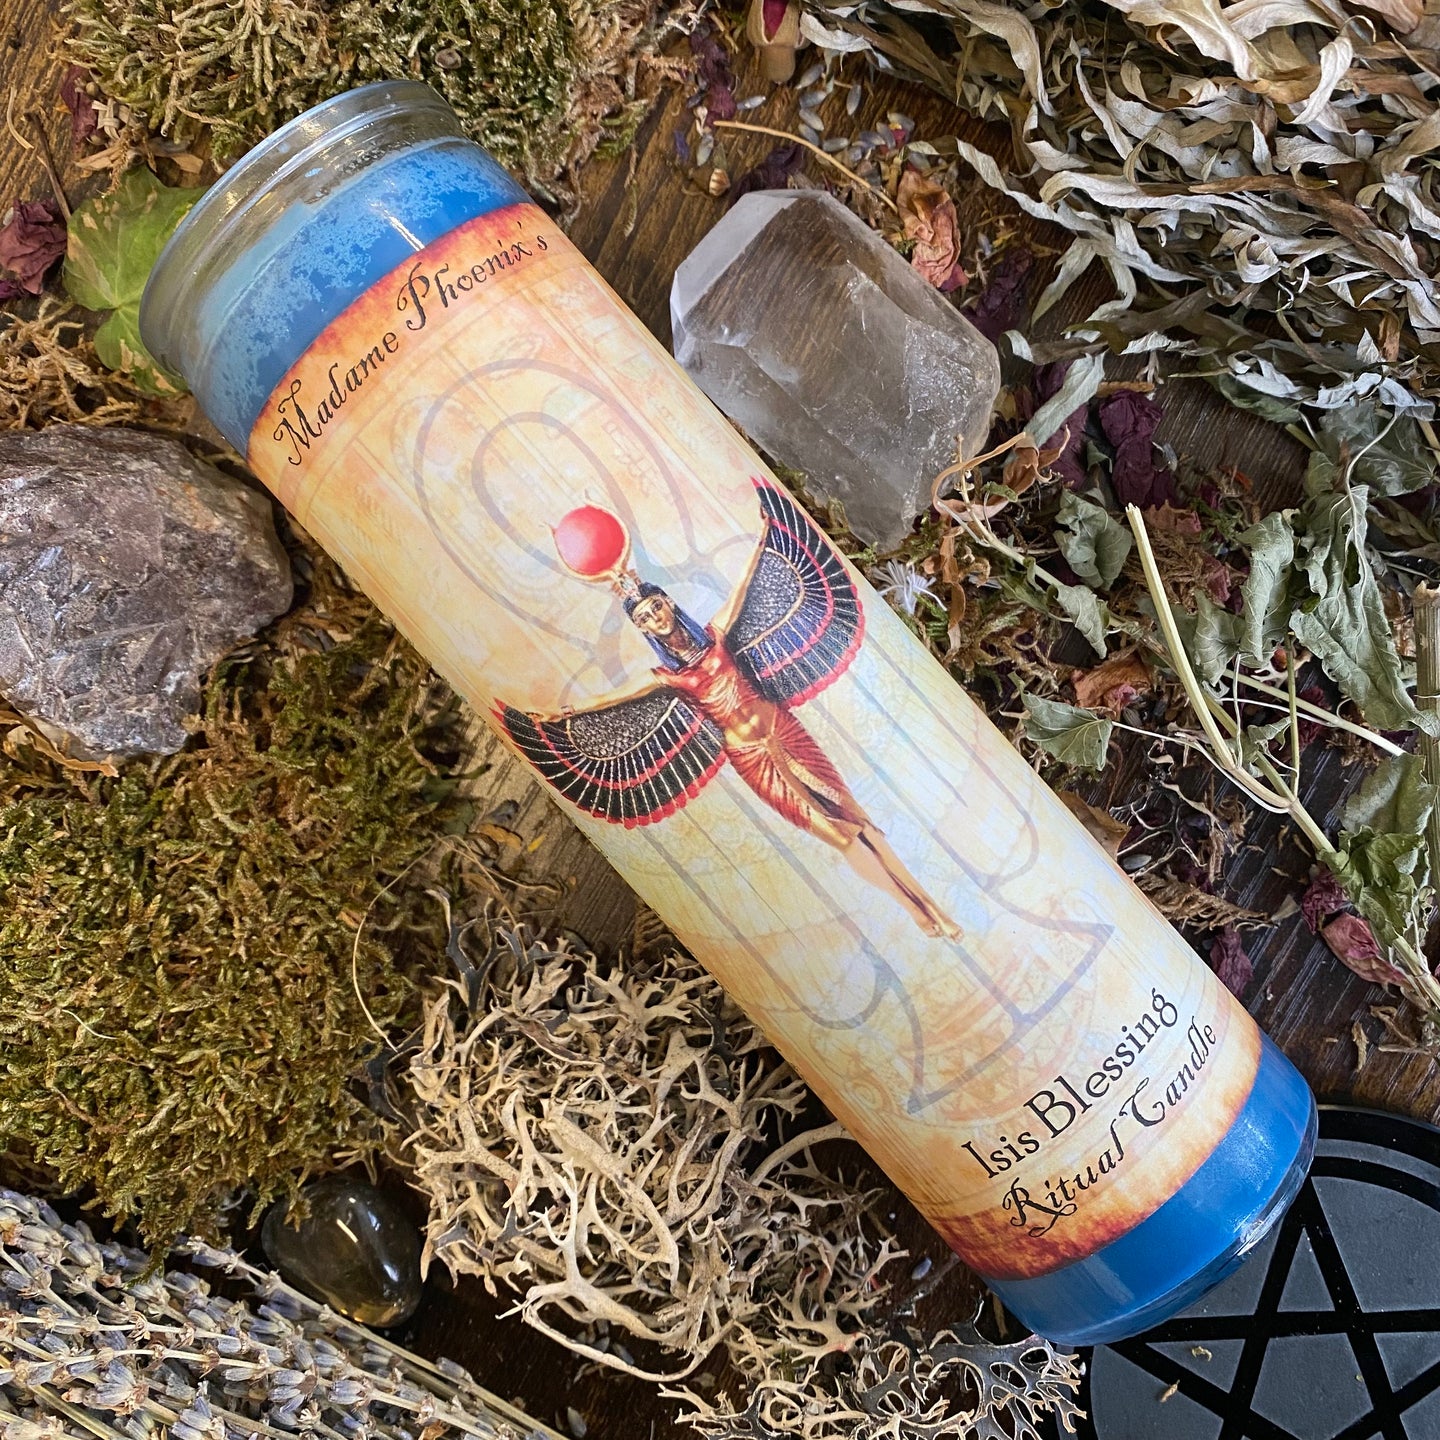 Isis Goddess 7 day Blessing Candle